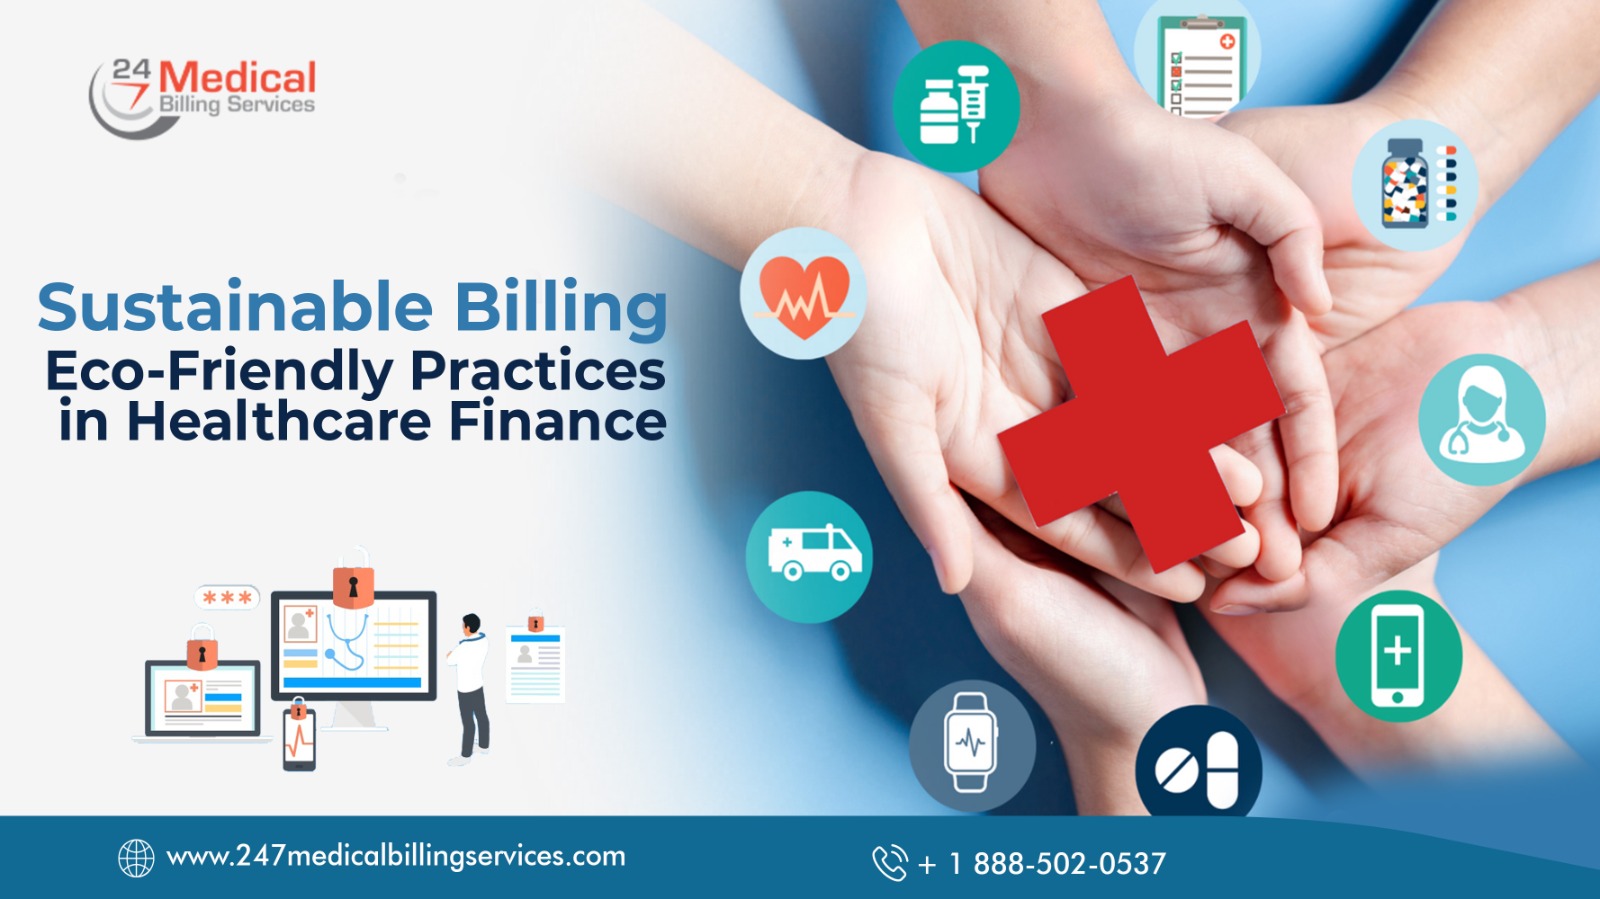  Sustainable Billing: Eco-Friendly Practices in Healthcare Finance